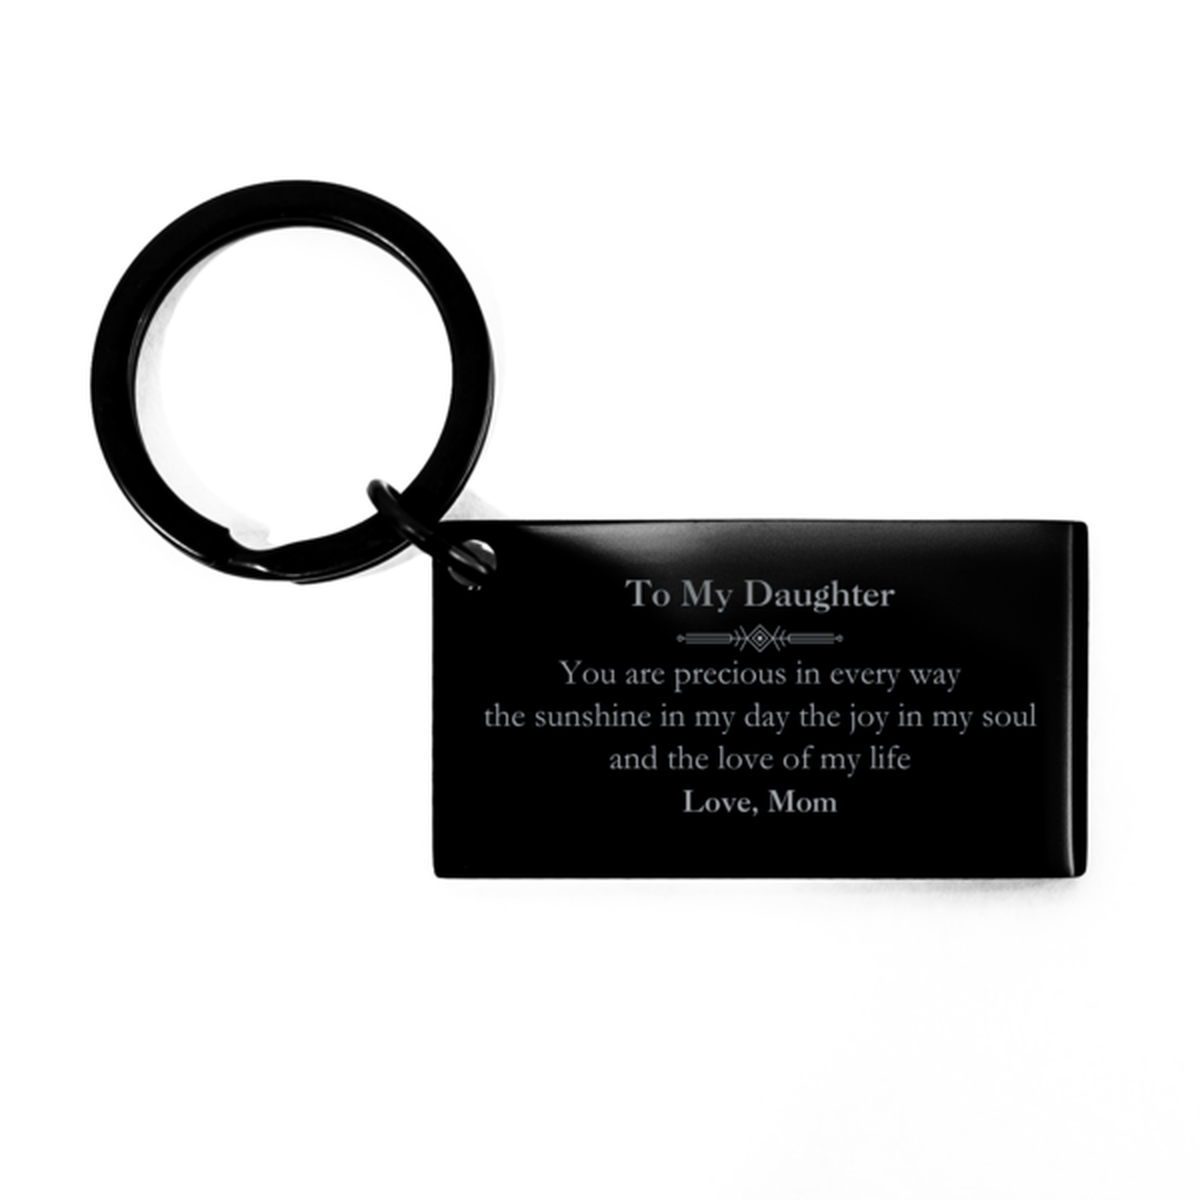 Graduation Gifts for Daughter Keychain Present from Mom, Christmas Daughter Birthday Gifts Daughter You are precious in every way the sunshine in my day. Love, Mom